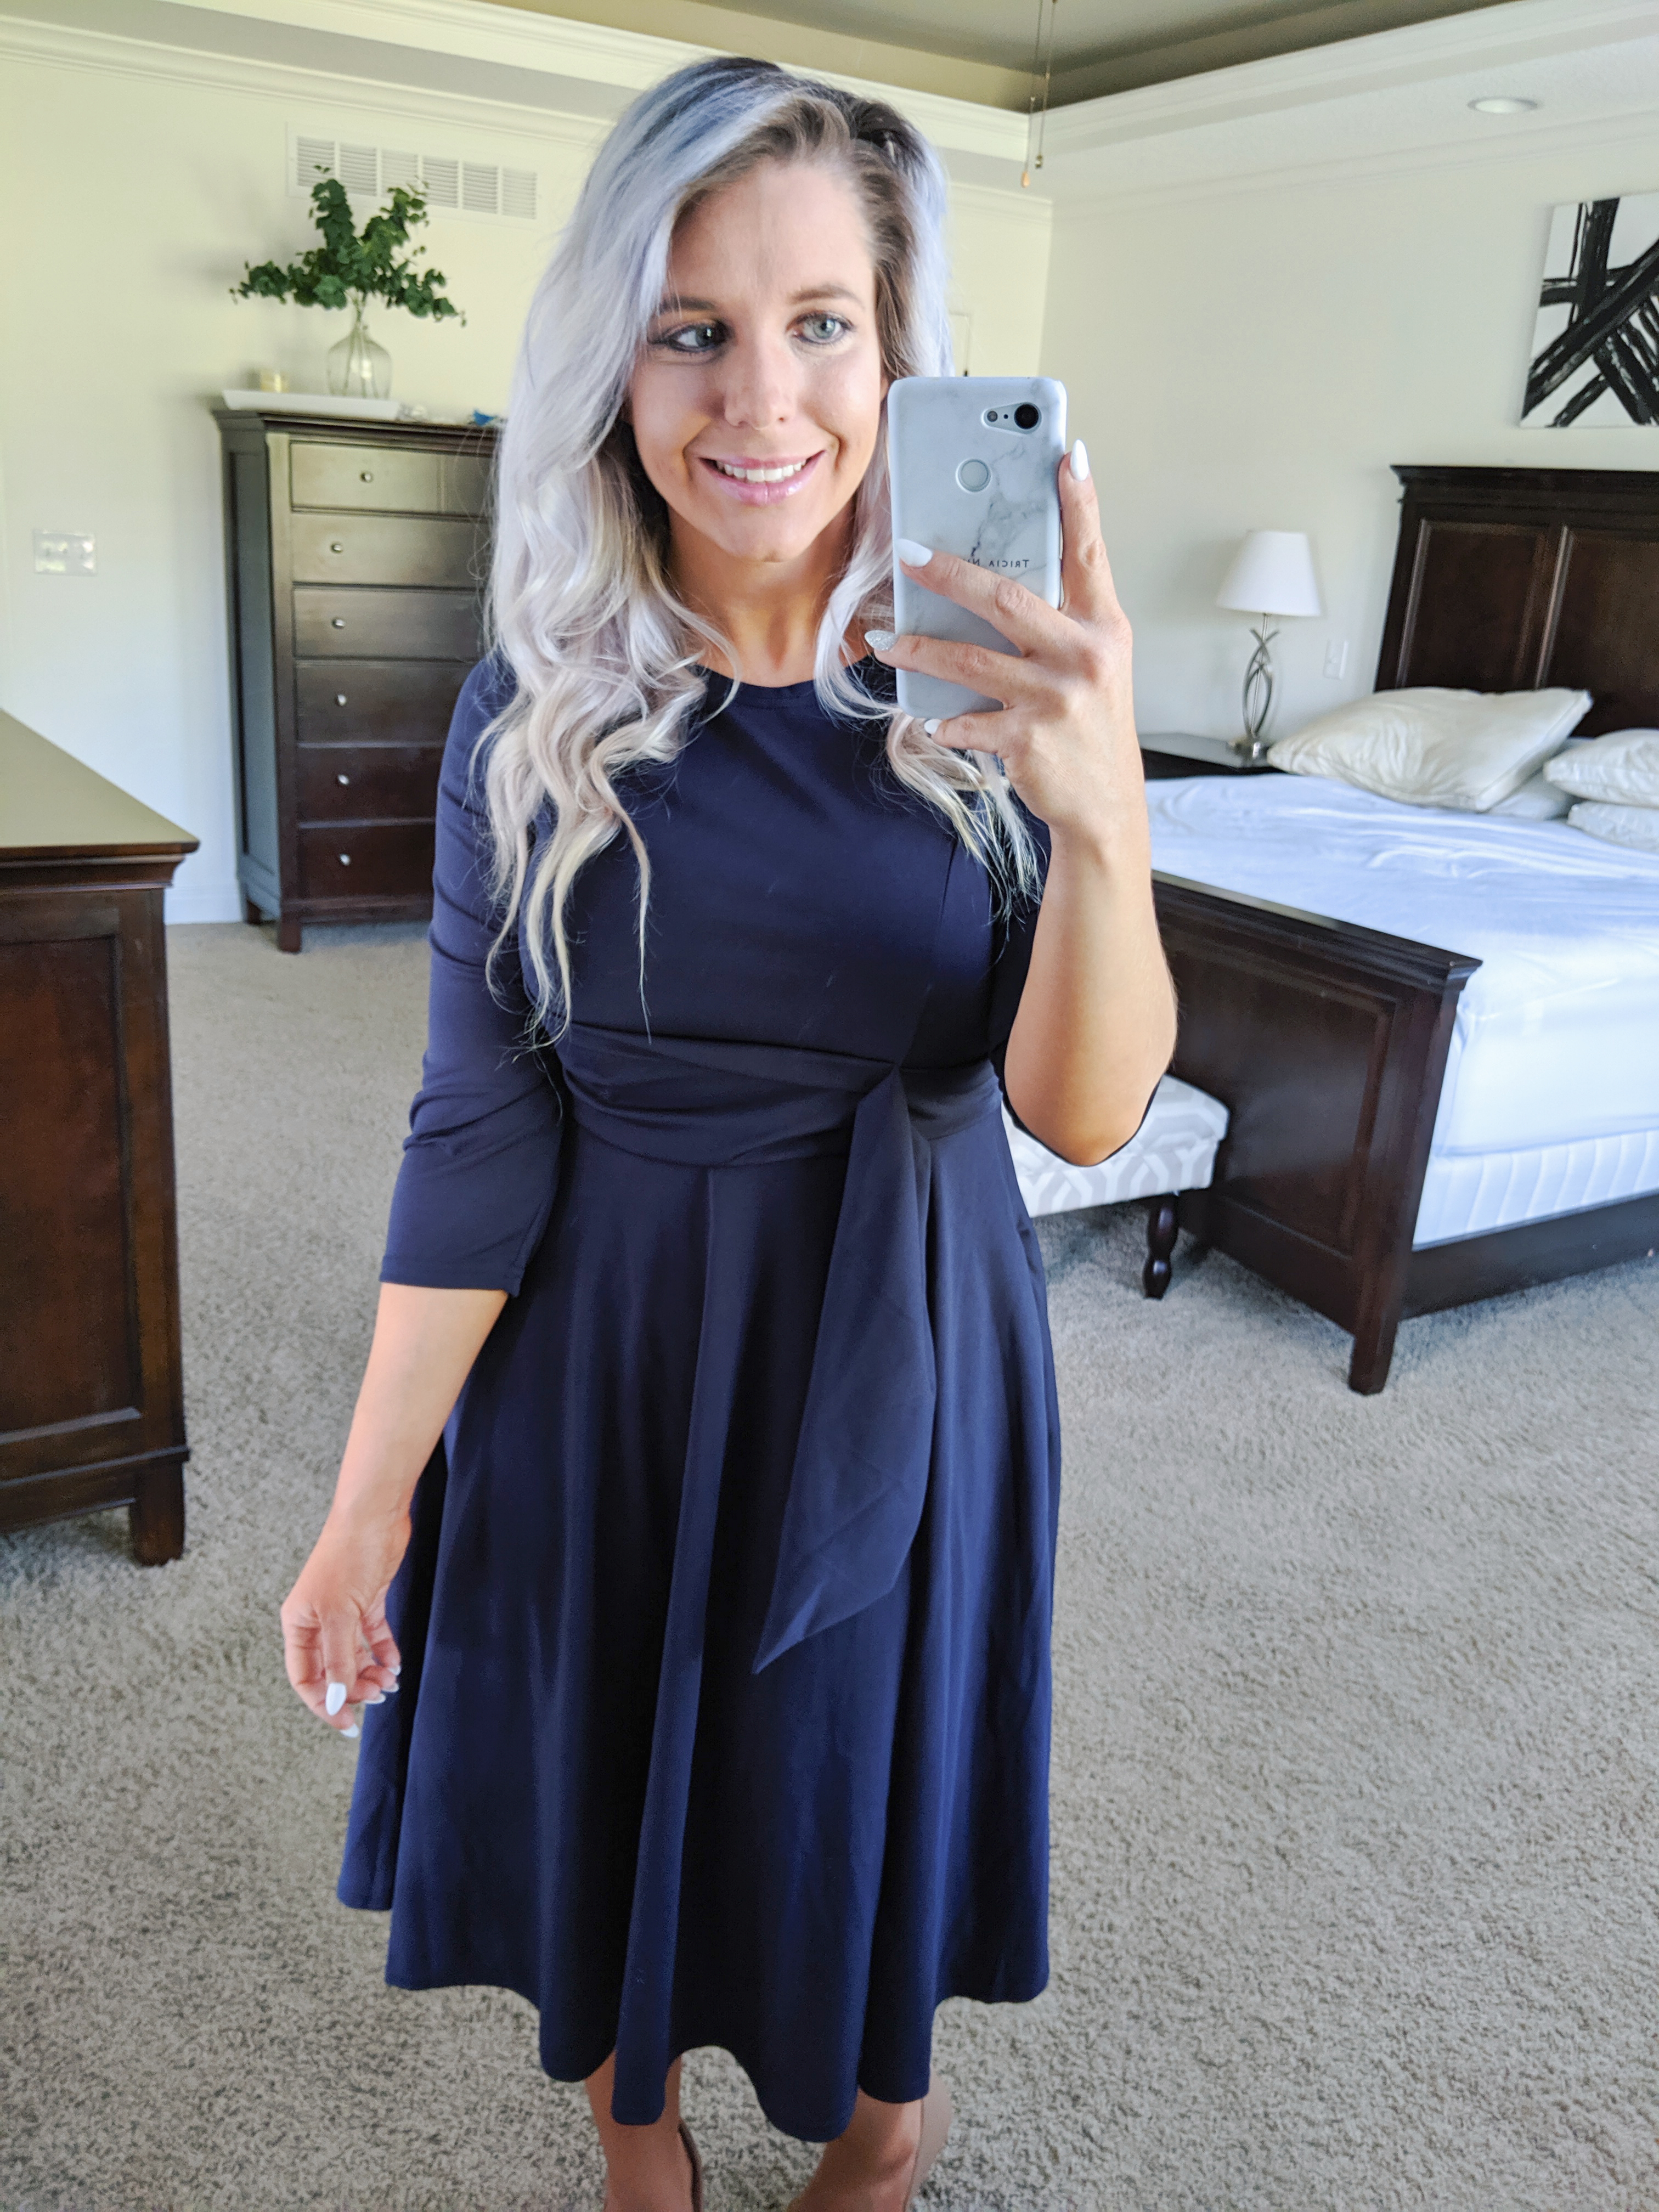 If you have an office job, you NEED to check out this try-on haul! Fashion blogger Tricia Nibarger shows the best work dresses on Amazon 2019. All dresses are budget-friendly and work appropriate. #tryon #amazonfinds #haul #workwear 